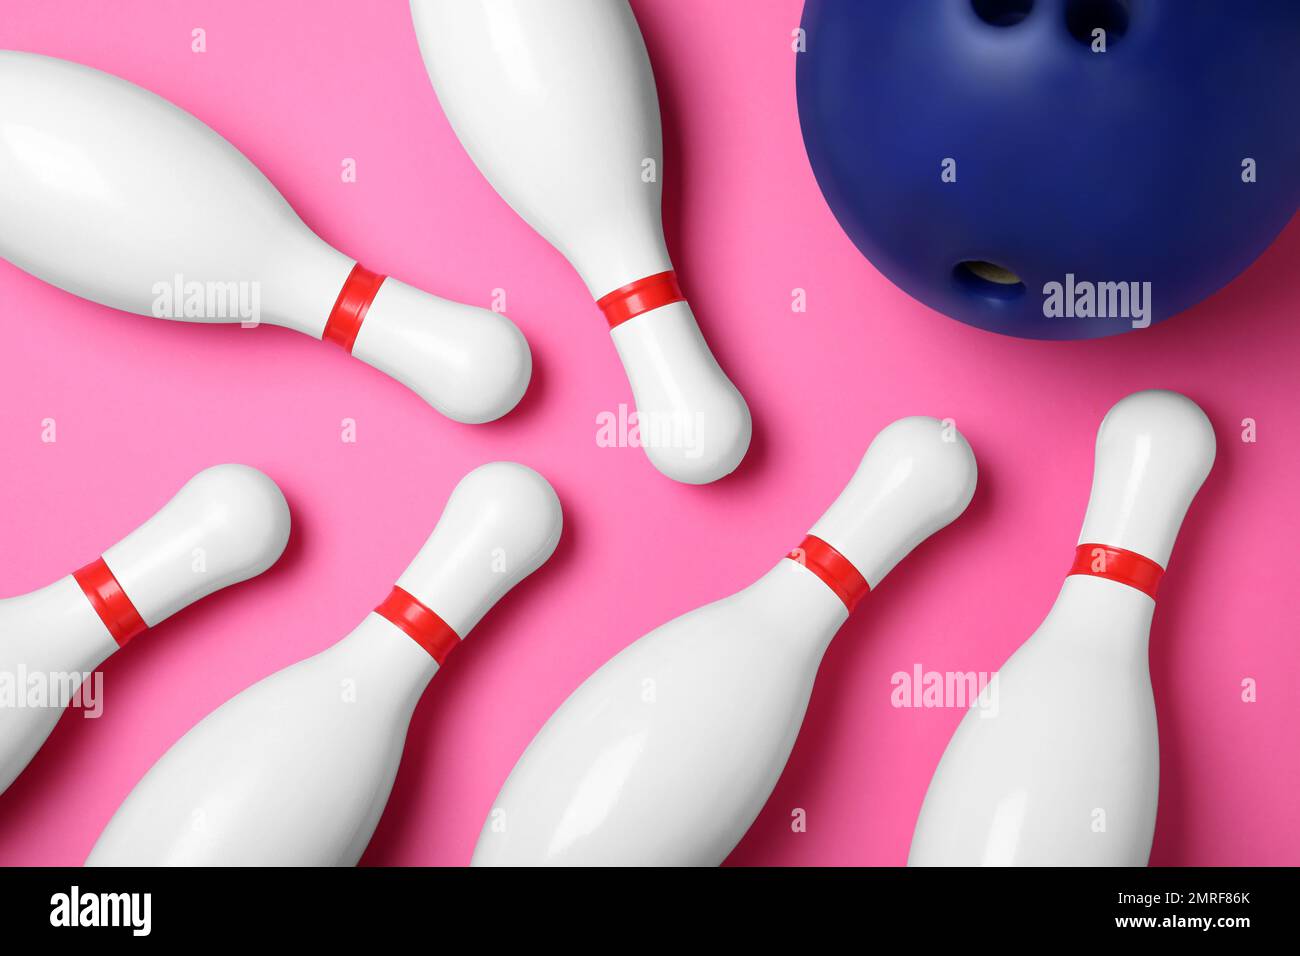 Bowling ball and pins on pink background, flat lay Stock Photo